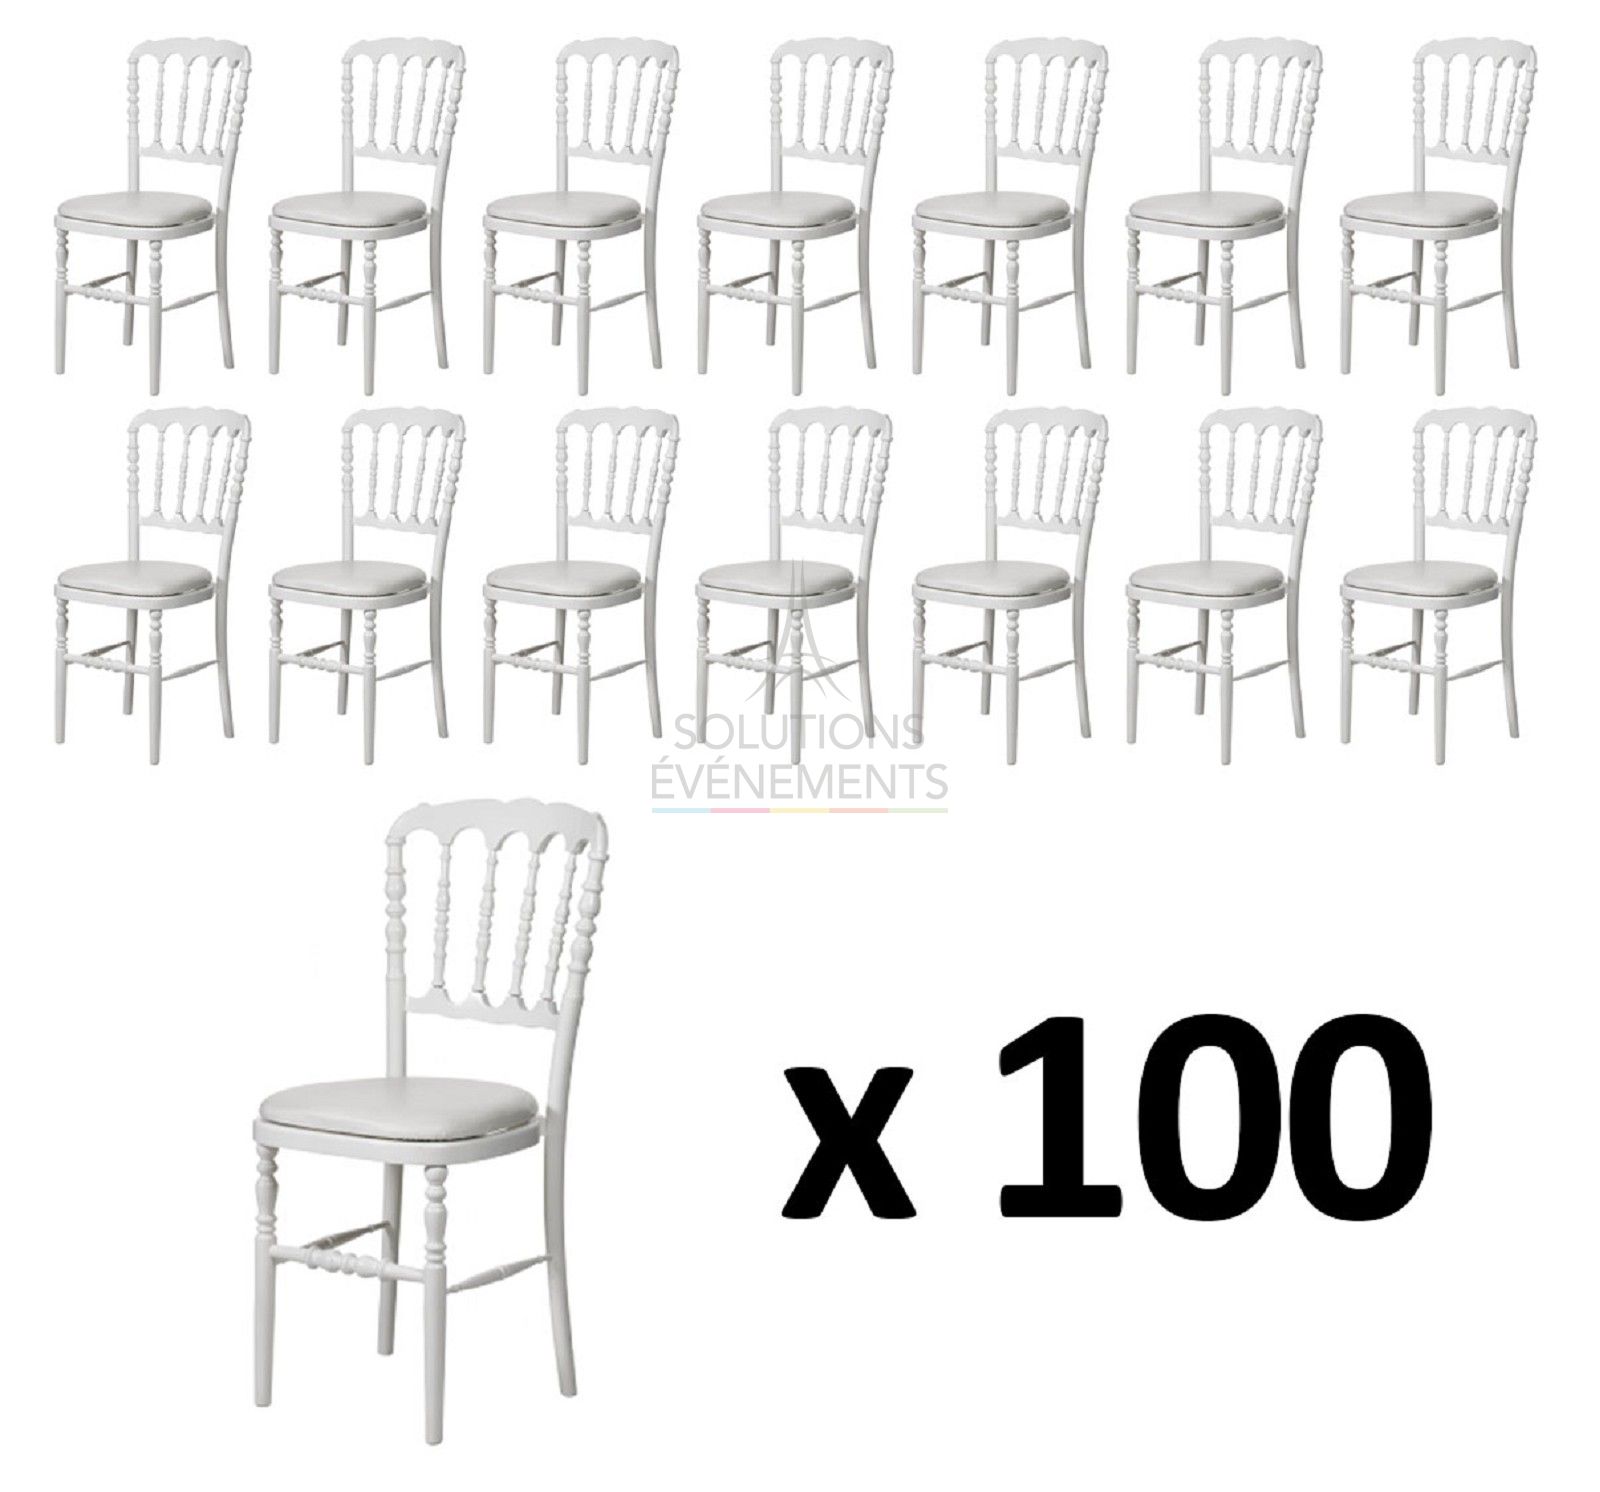 Rental of 100 white recyclable Napoleon chairs with white seat